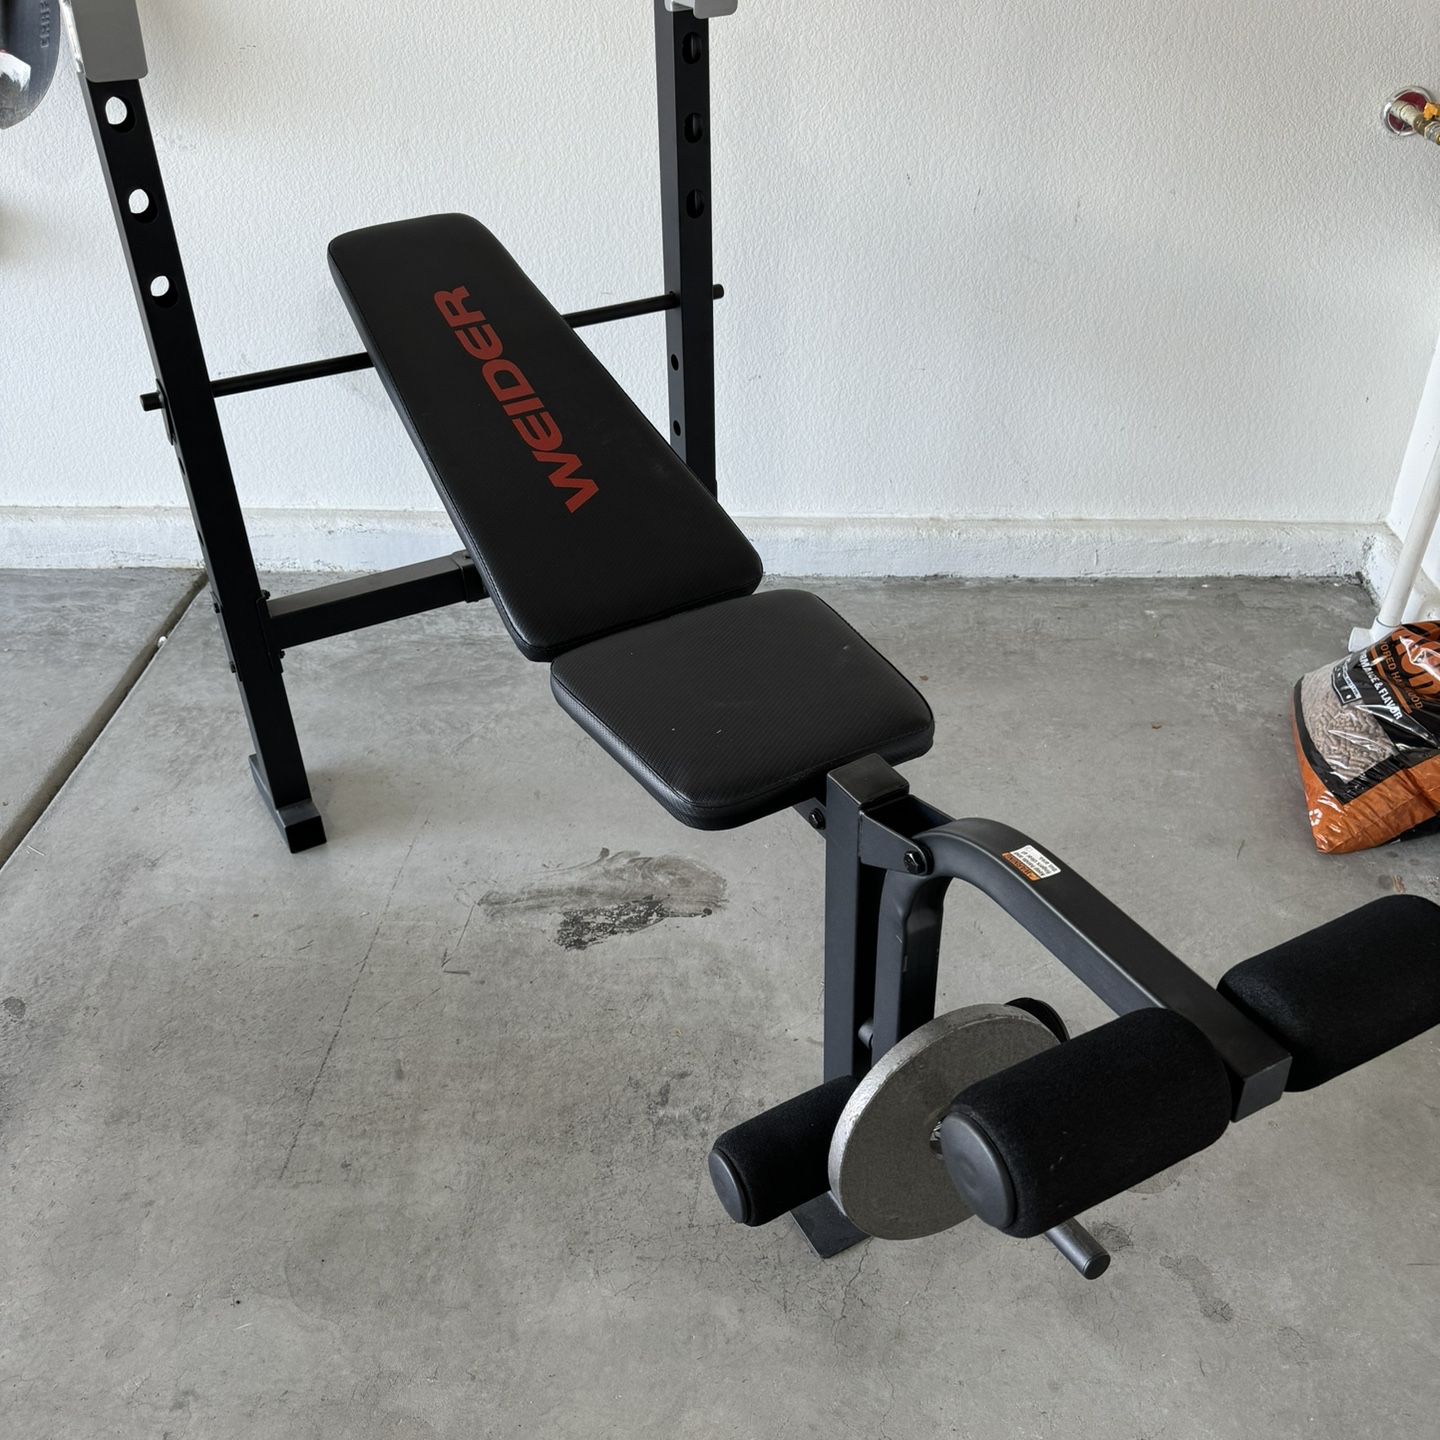 Adjustable Weight Bench And Gym Equipment (Brand new)